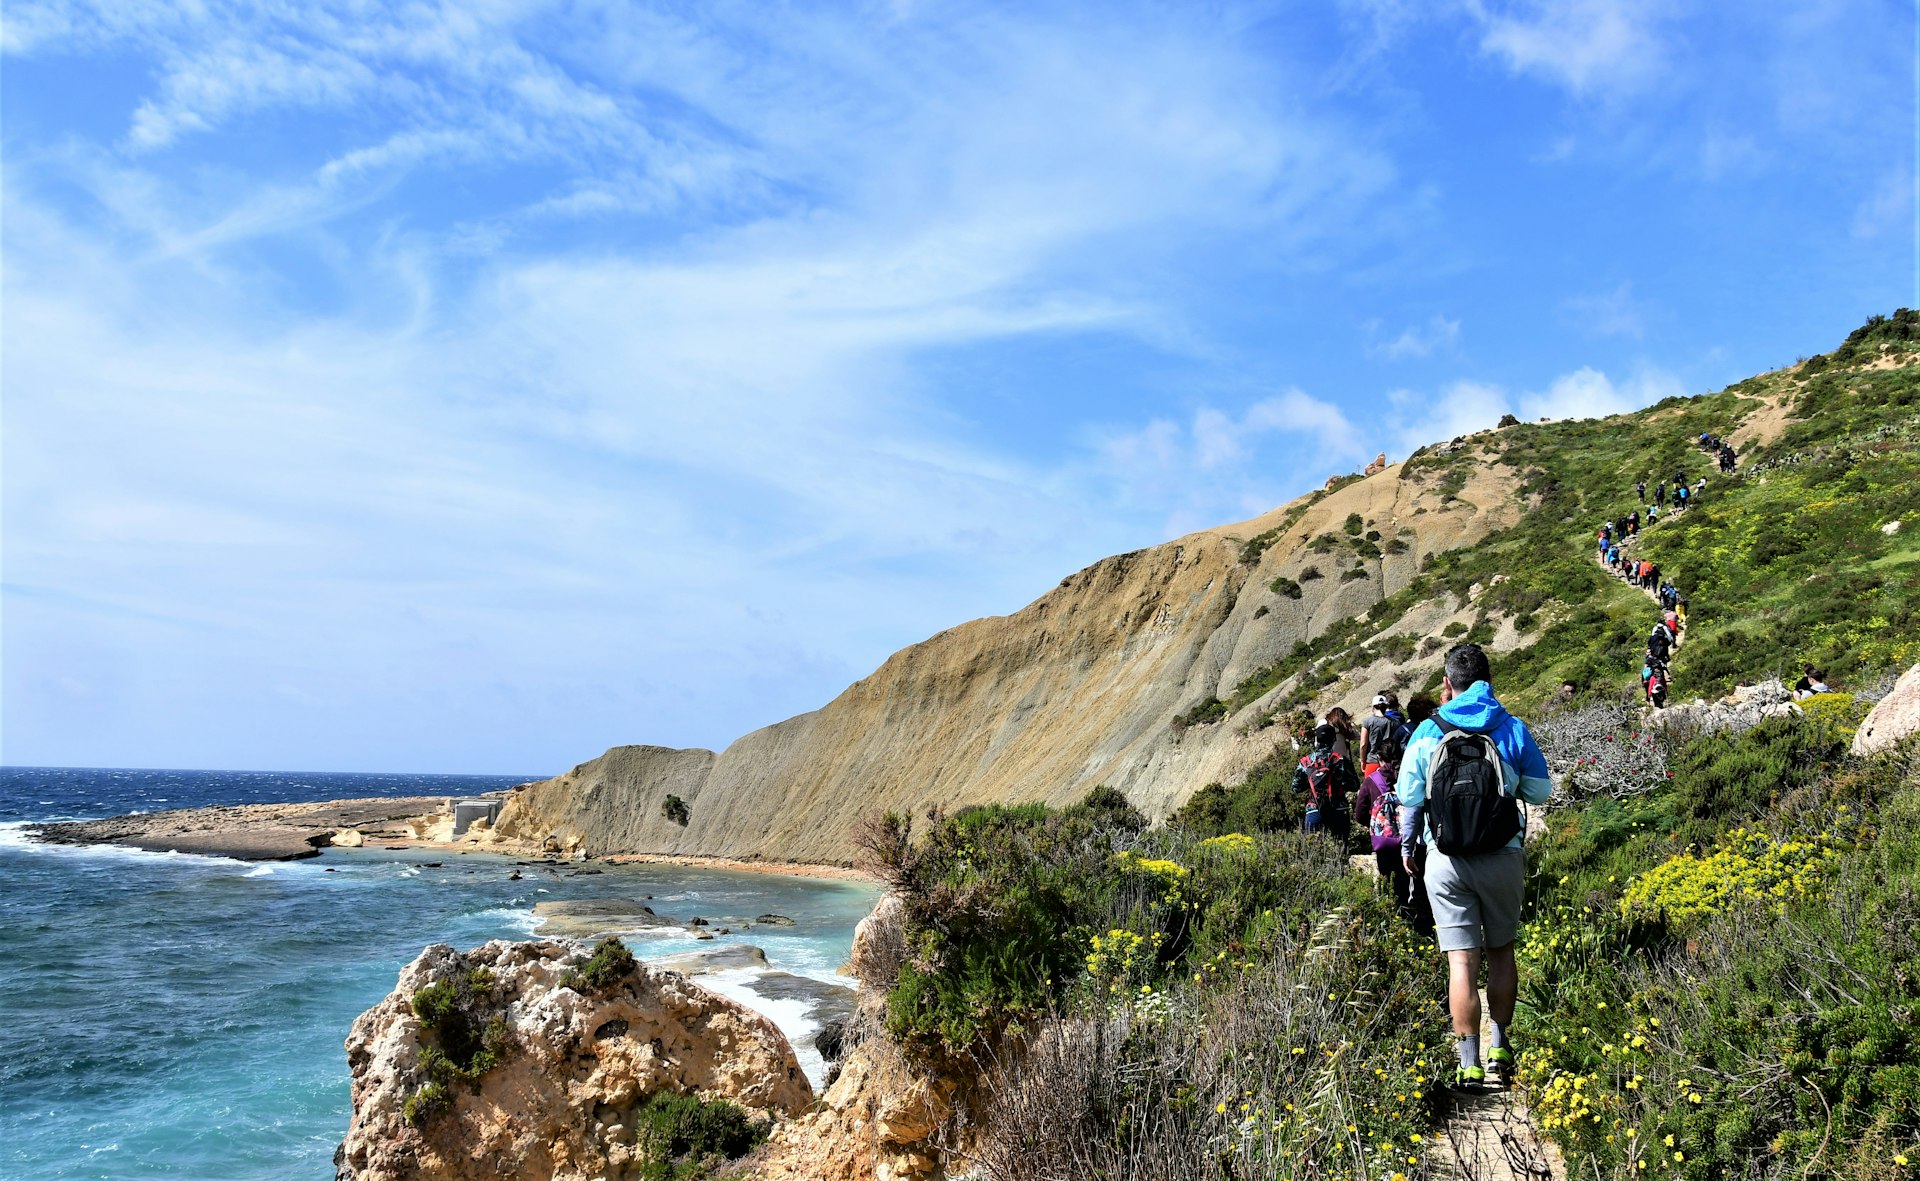 A line of hikers ascend a hill on the coast of Gozo island